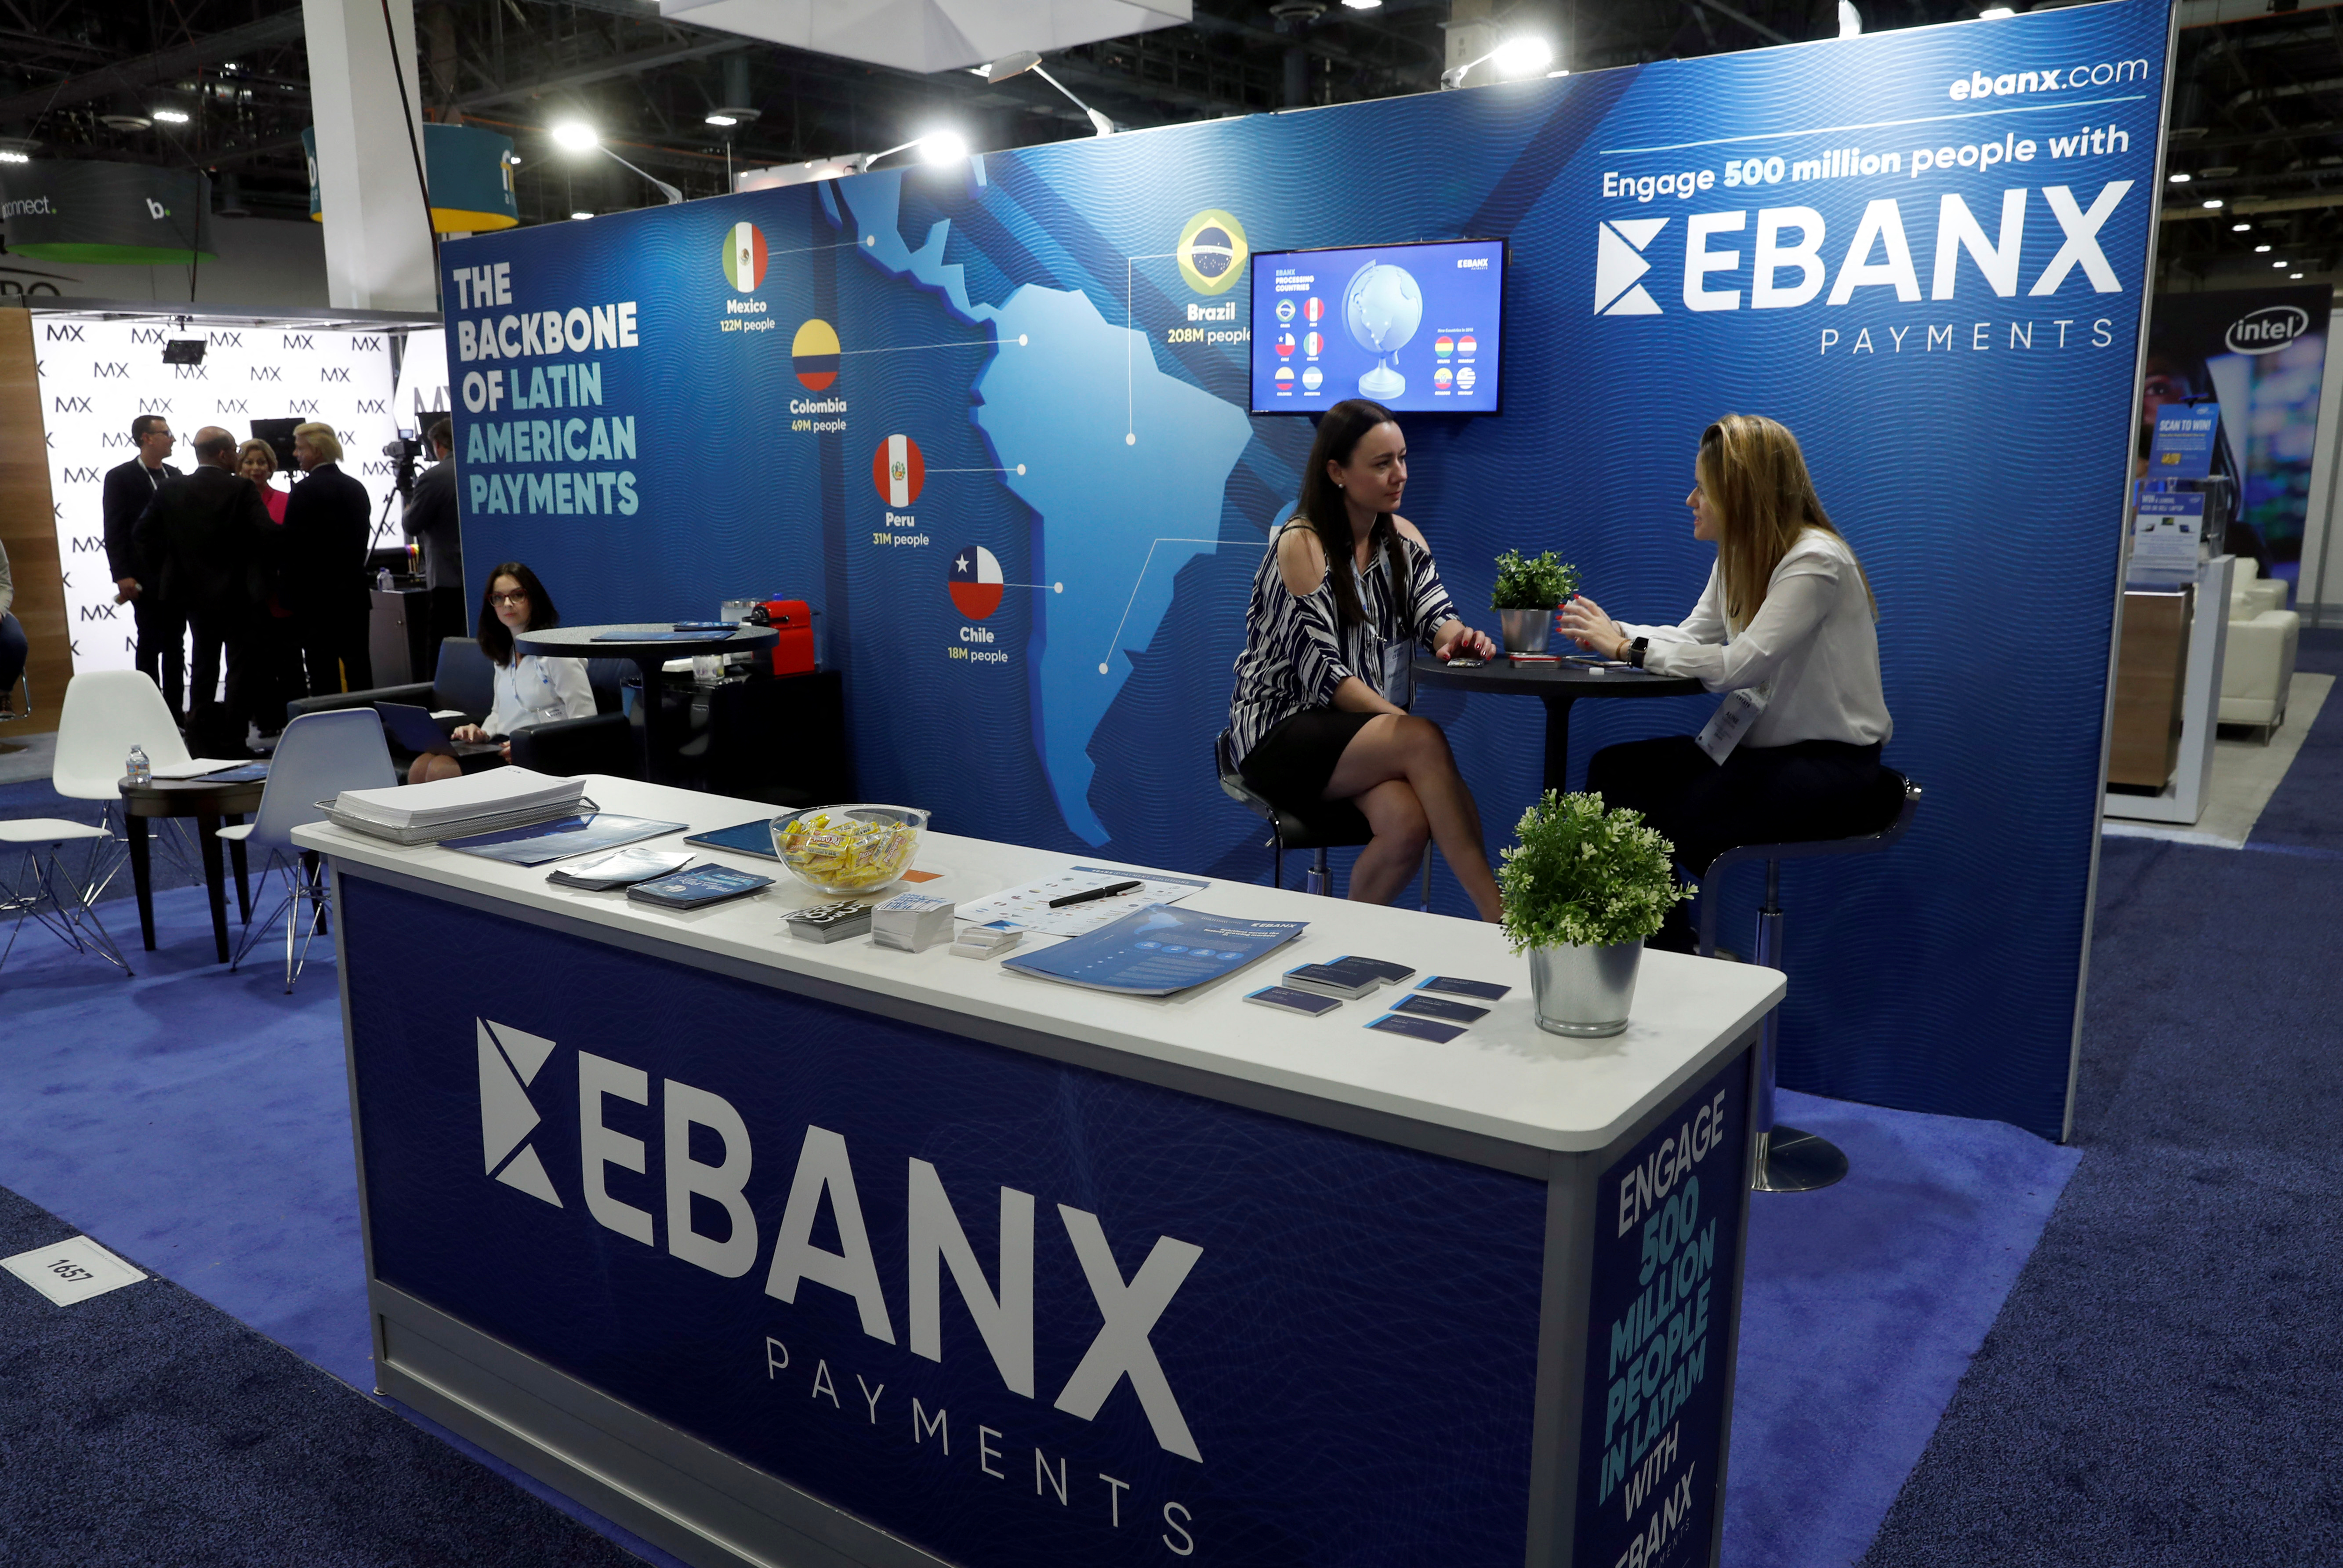 EBANX, a South and Central American payment processor, displays on the exhibit hall floor during the Money 20/20 conference in Las Vegas